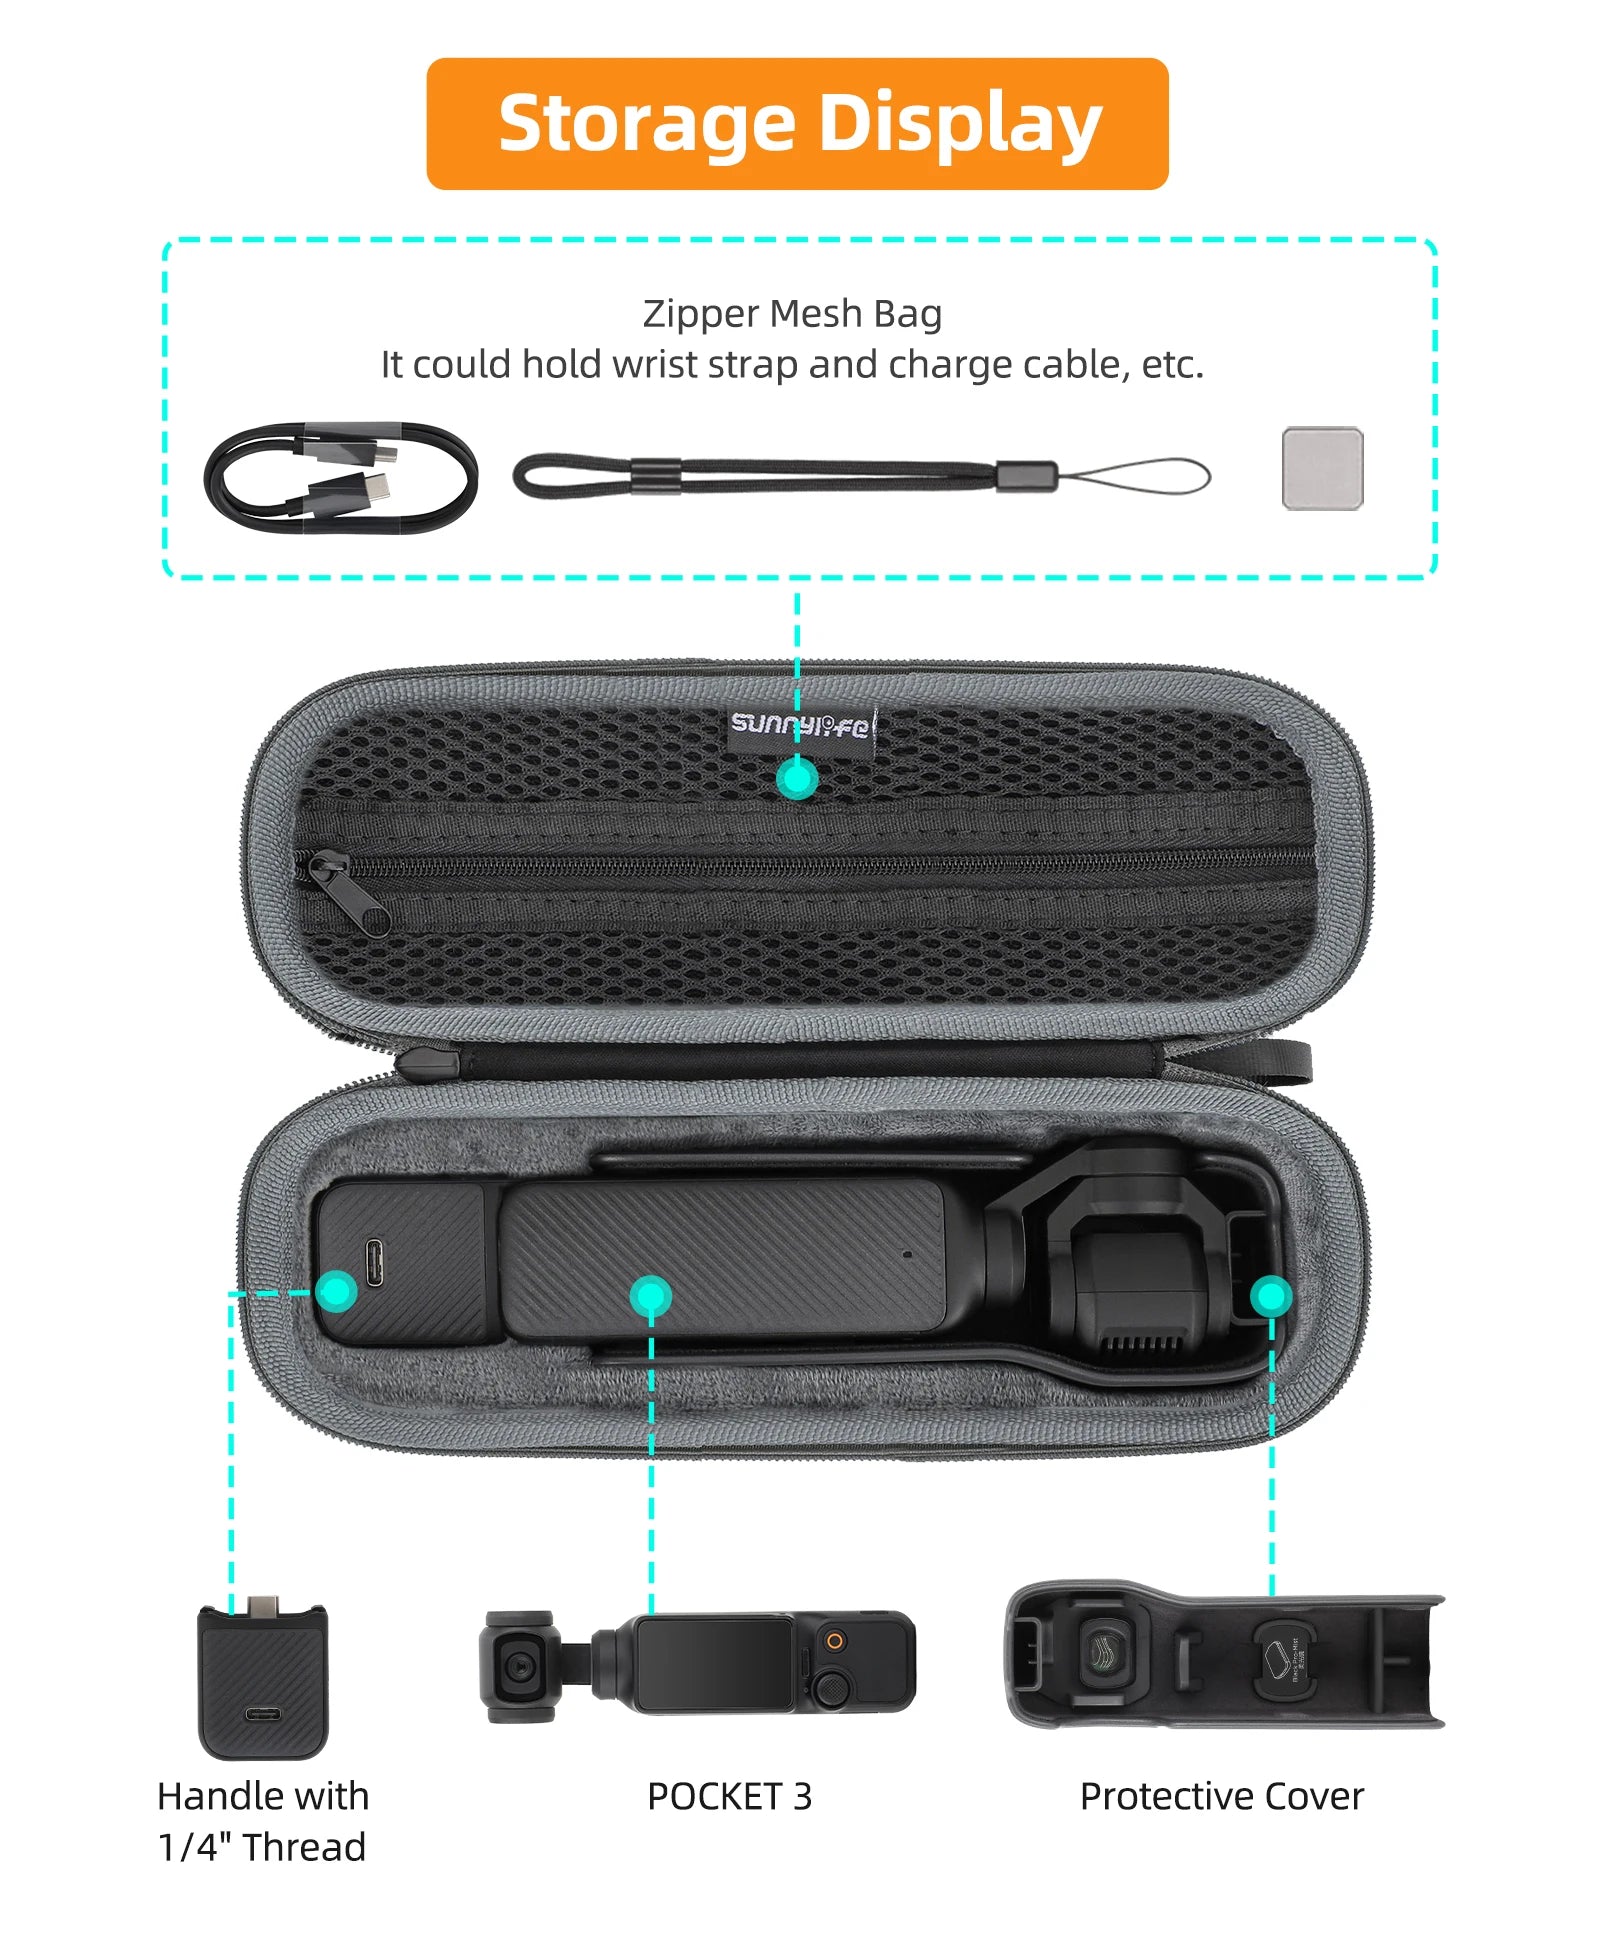 For DJI Pocket 3 Storage Bag, Storage Display Zipper Mesh Bag It could hold wrist strap and charge cable, etc: sunny